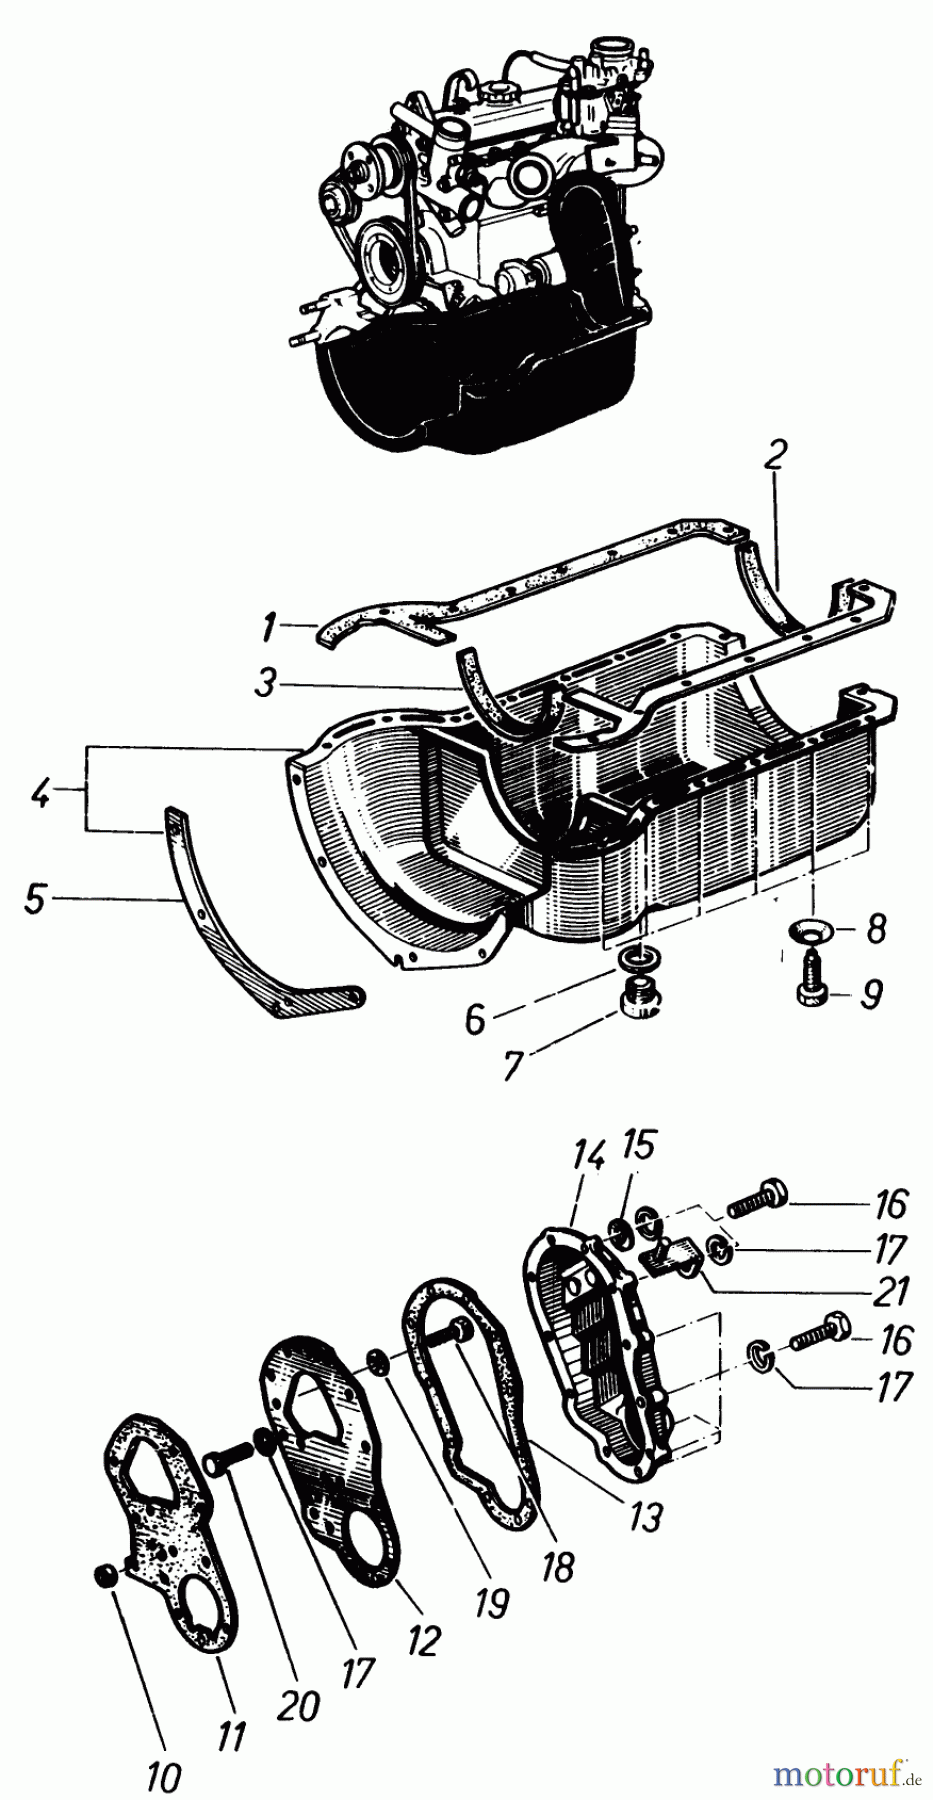  Toro Neu Mowers, Lawn & Garden Tractor Seite 2 91-20RG01 (D-250) - Toro D-250 10-Speed Tractor, 1981 OIL PAN AND TIMING CHAIN COVER